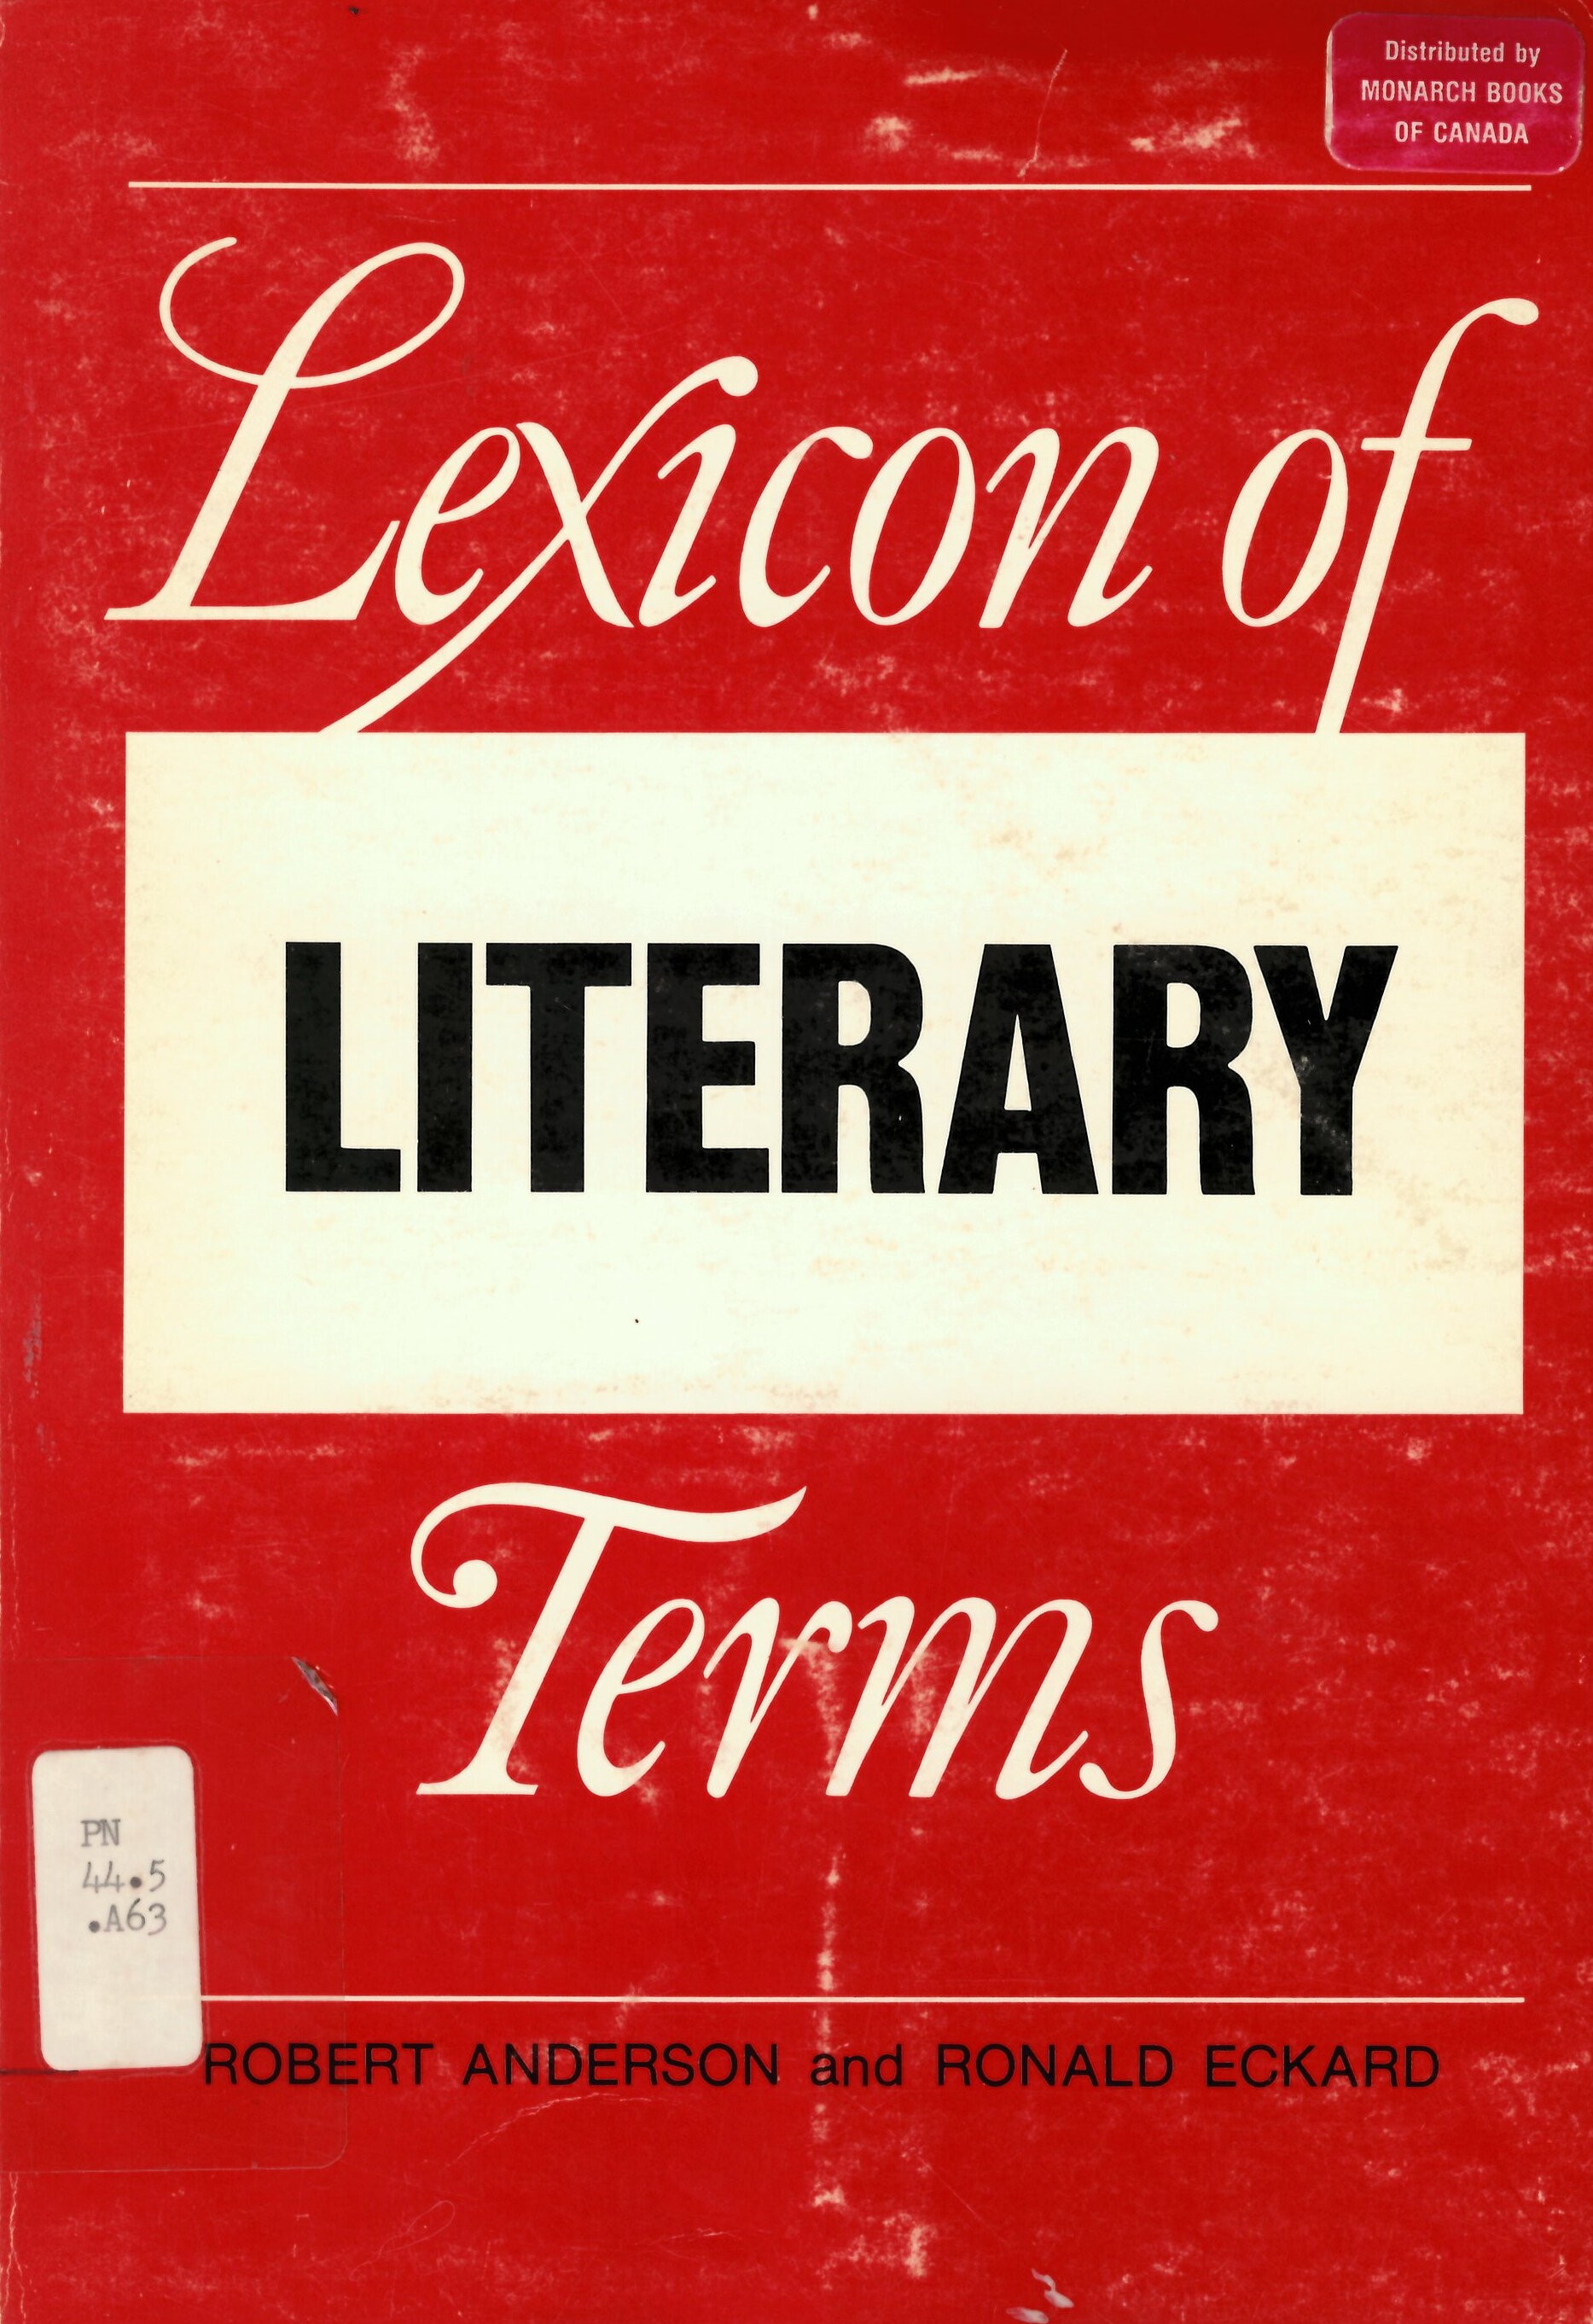 Lexicon of literary terms